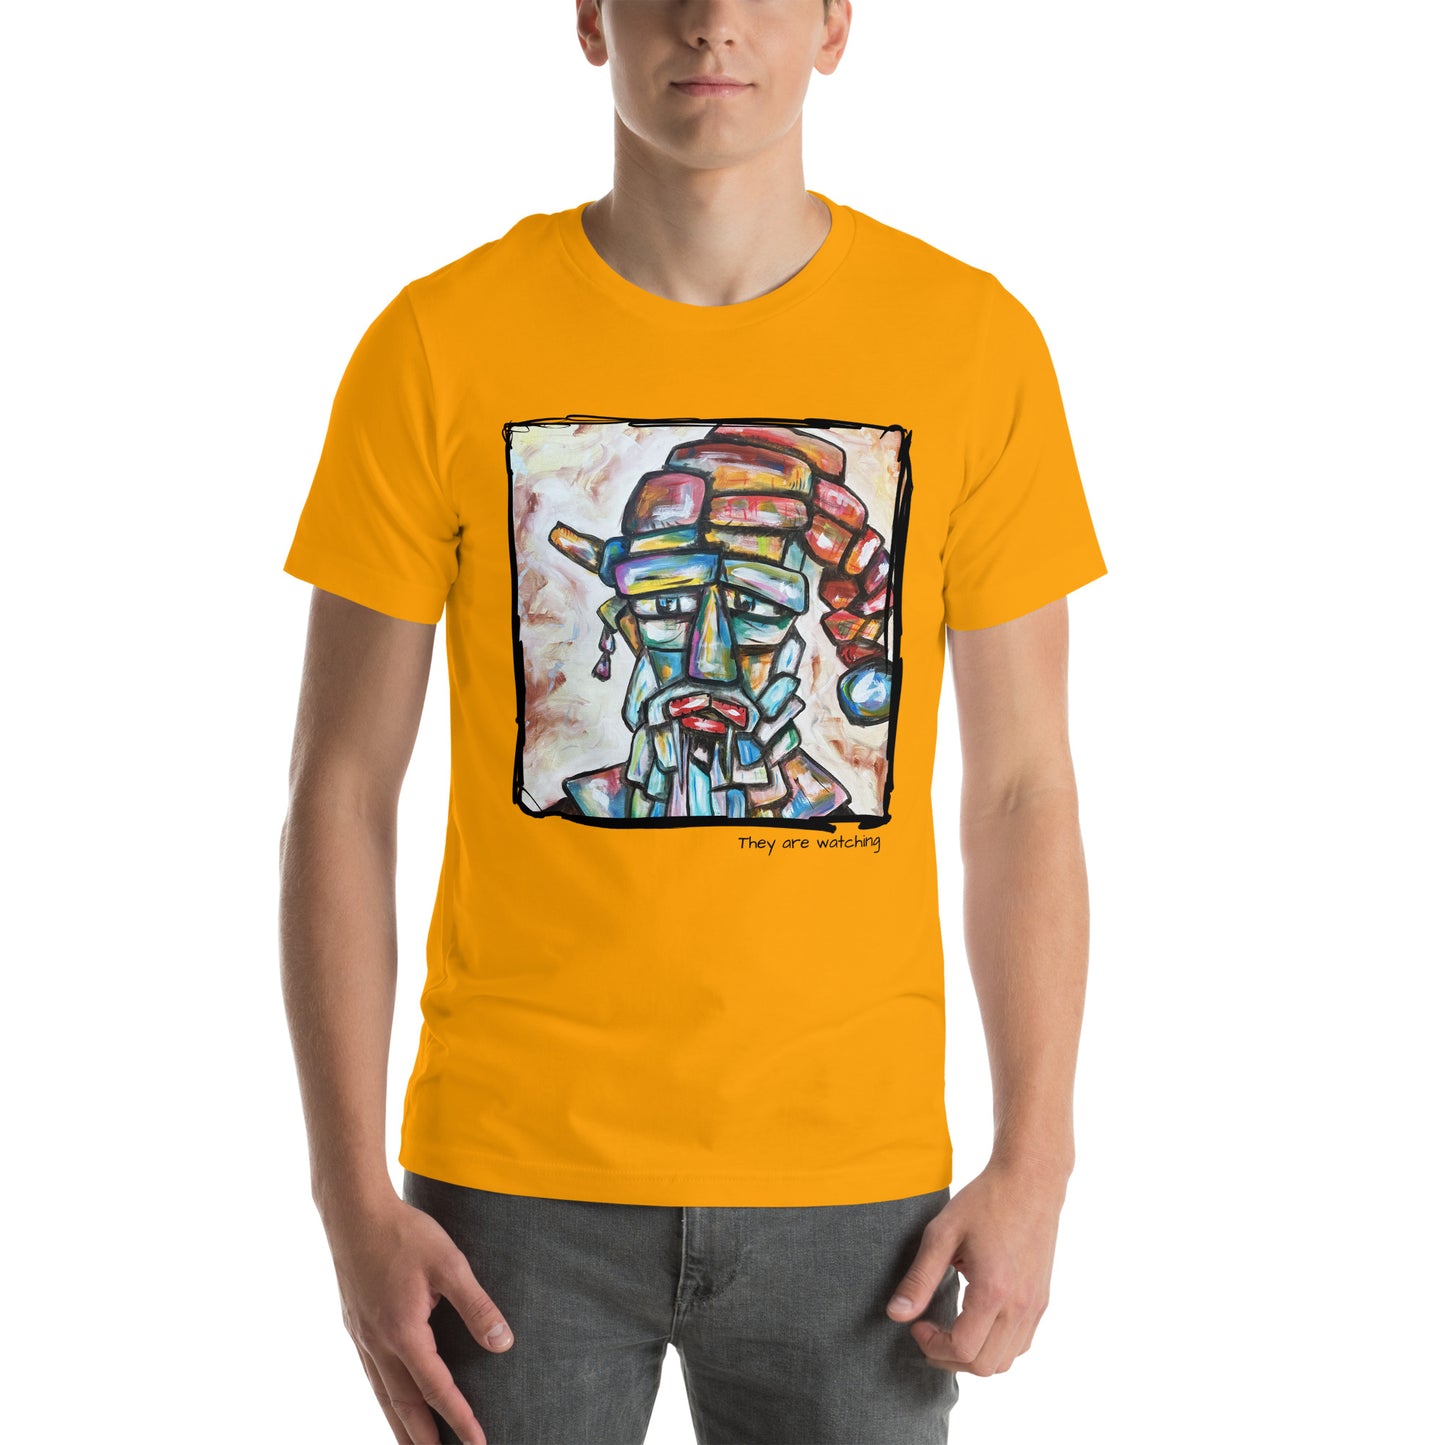 They are watching us - Santa - T-shirt